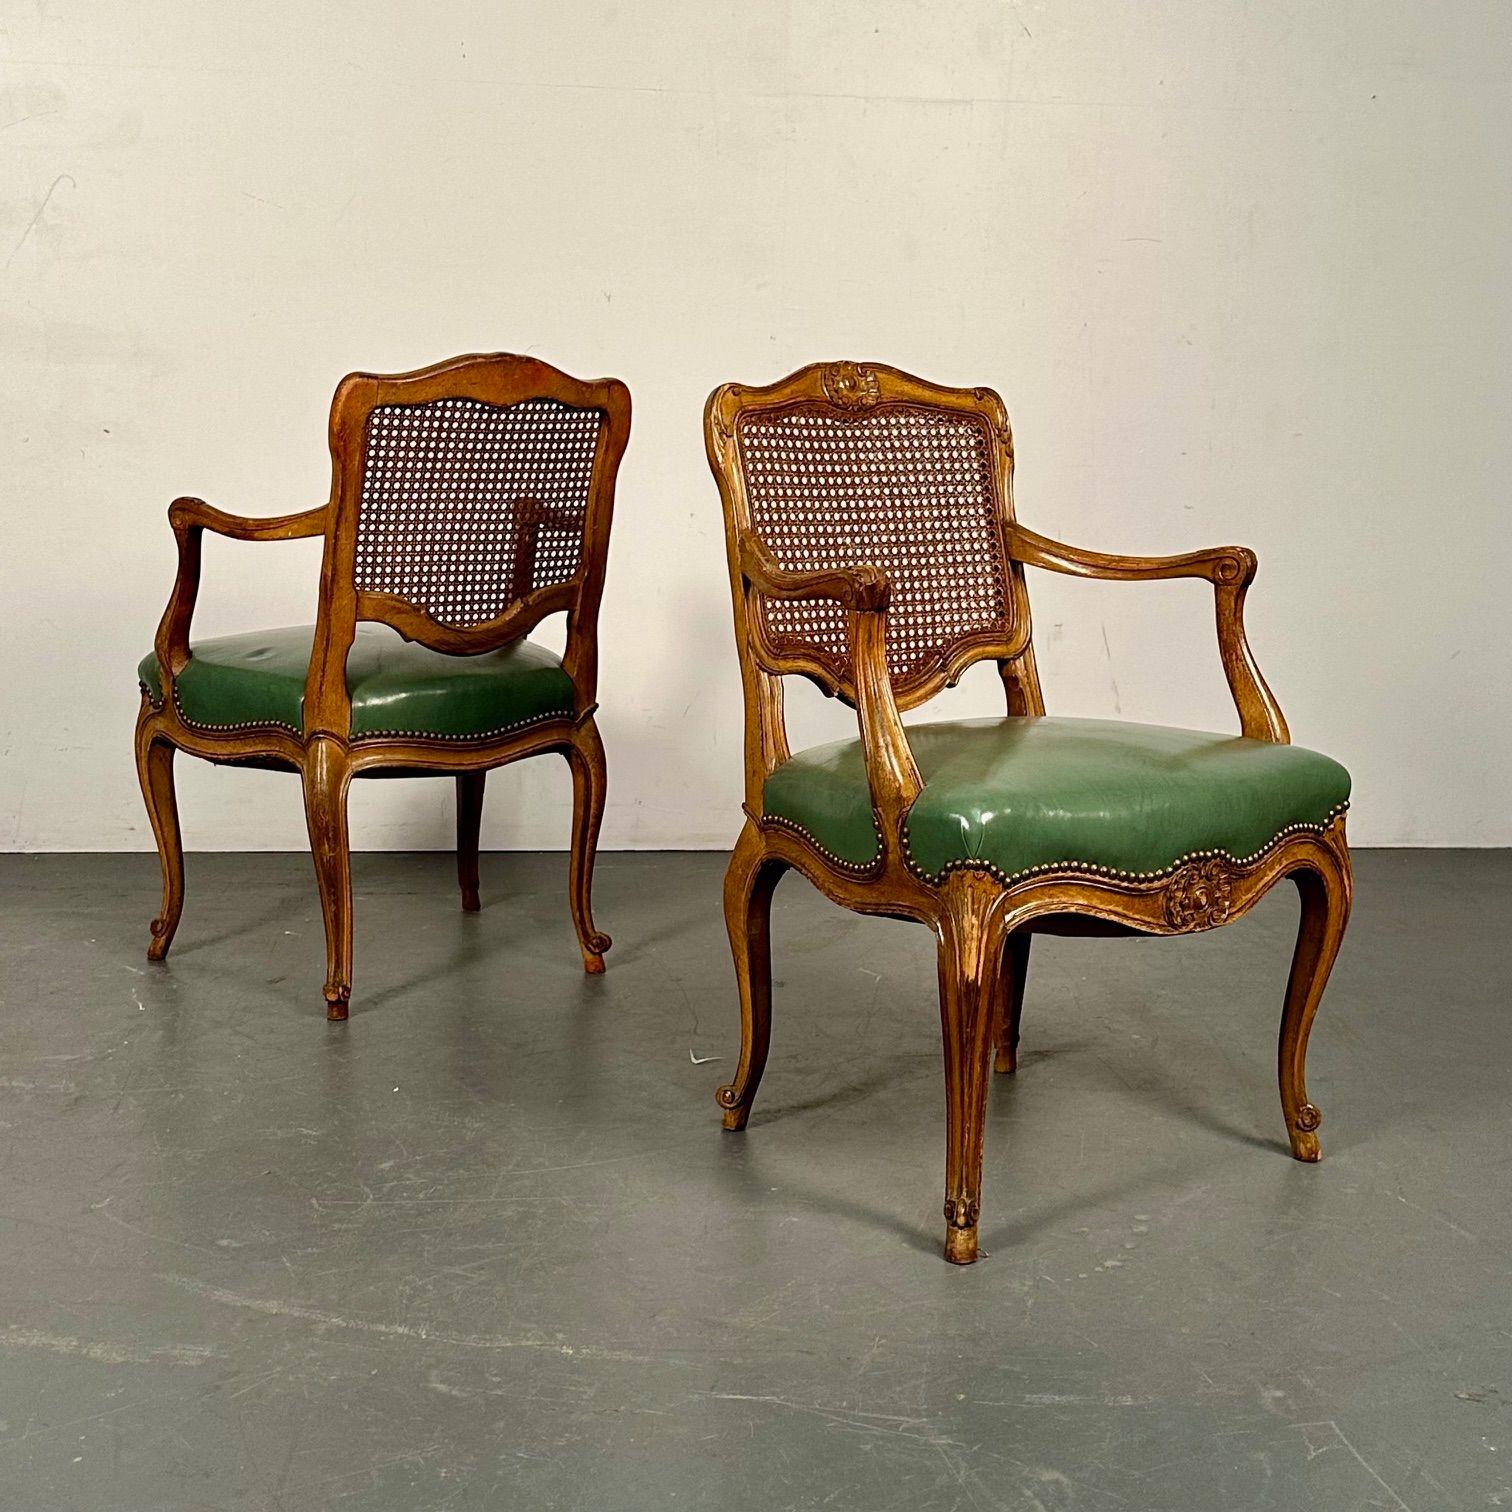 Four French Louis XV Style Fauteuils / Office Chairs, Cane and Leather In Good Condition For Sale In Stamford, CT